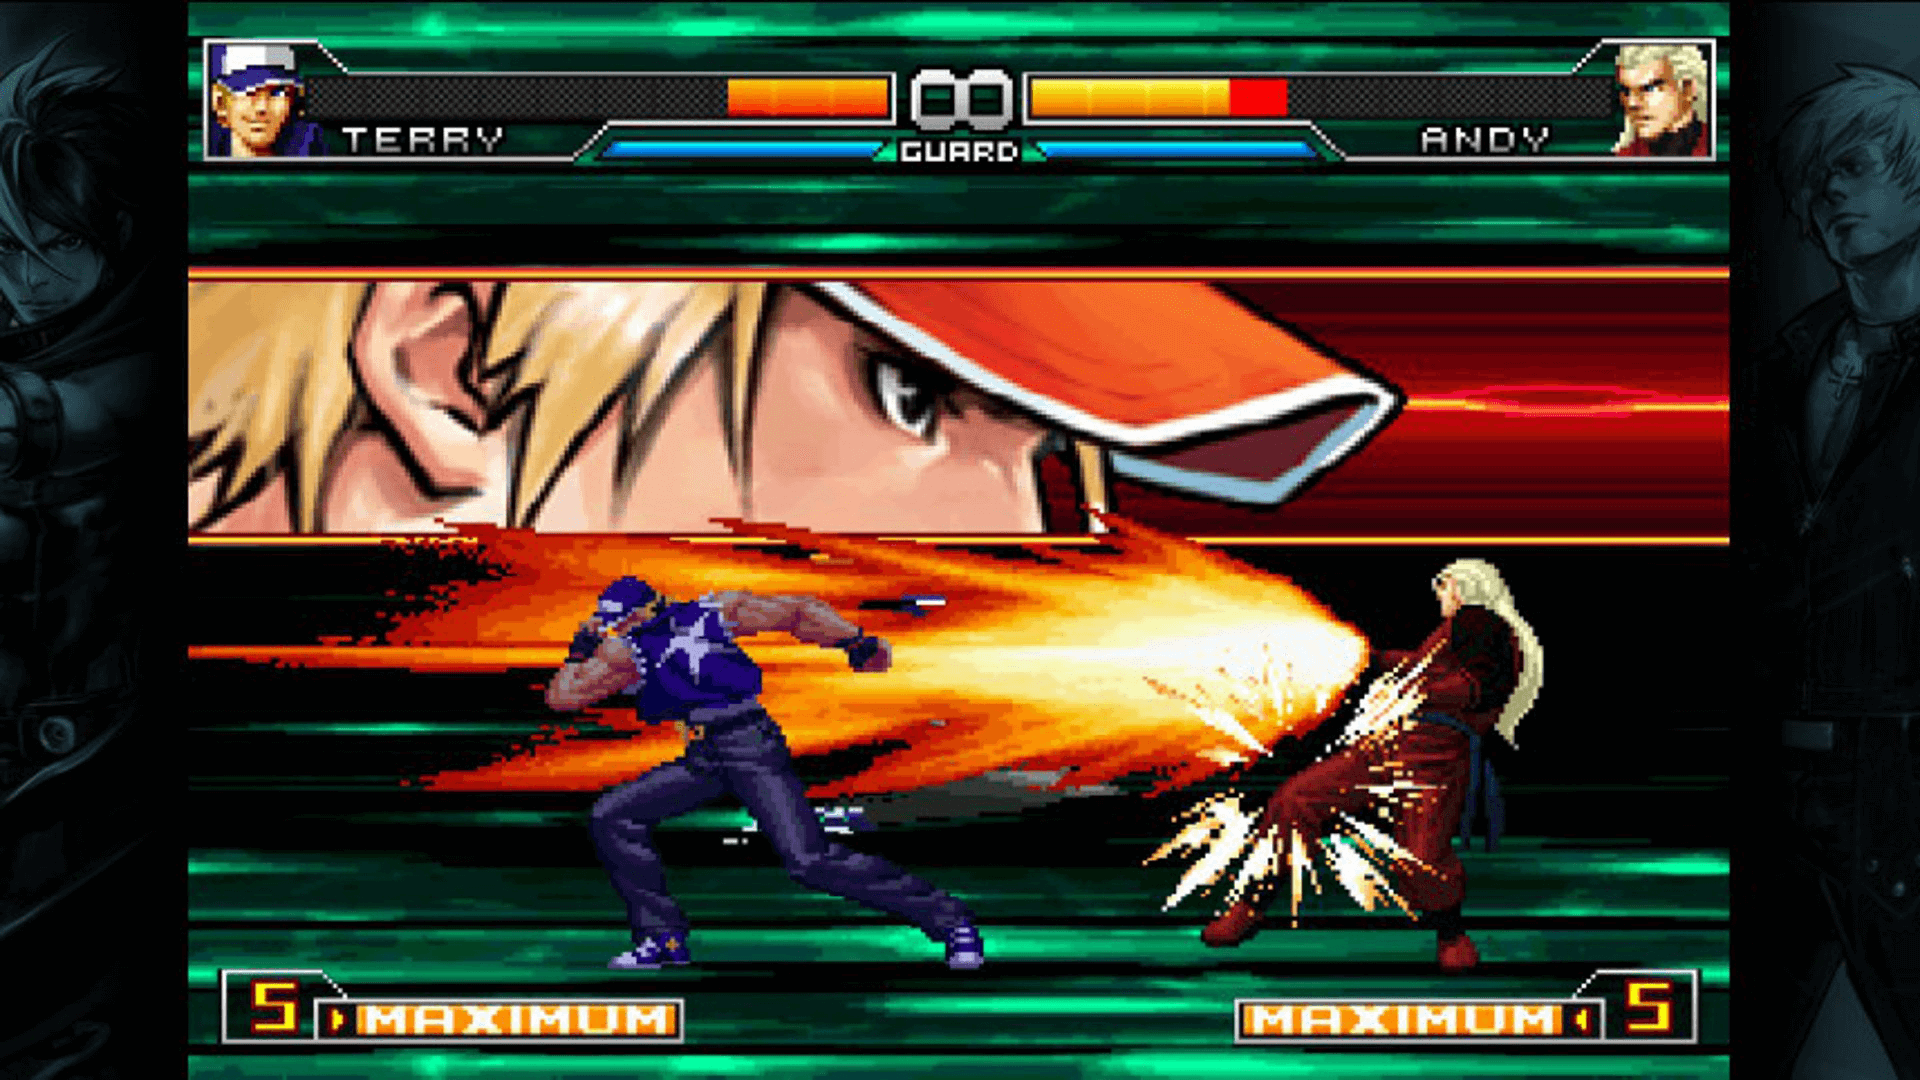 King of Fighters 2002 Unlimited Match Is Now Available Digitally